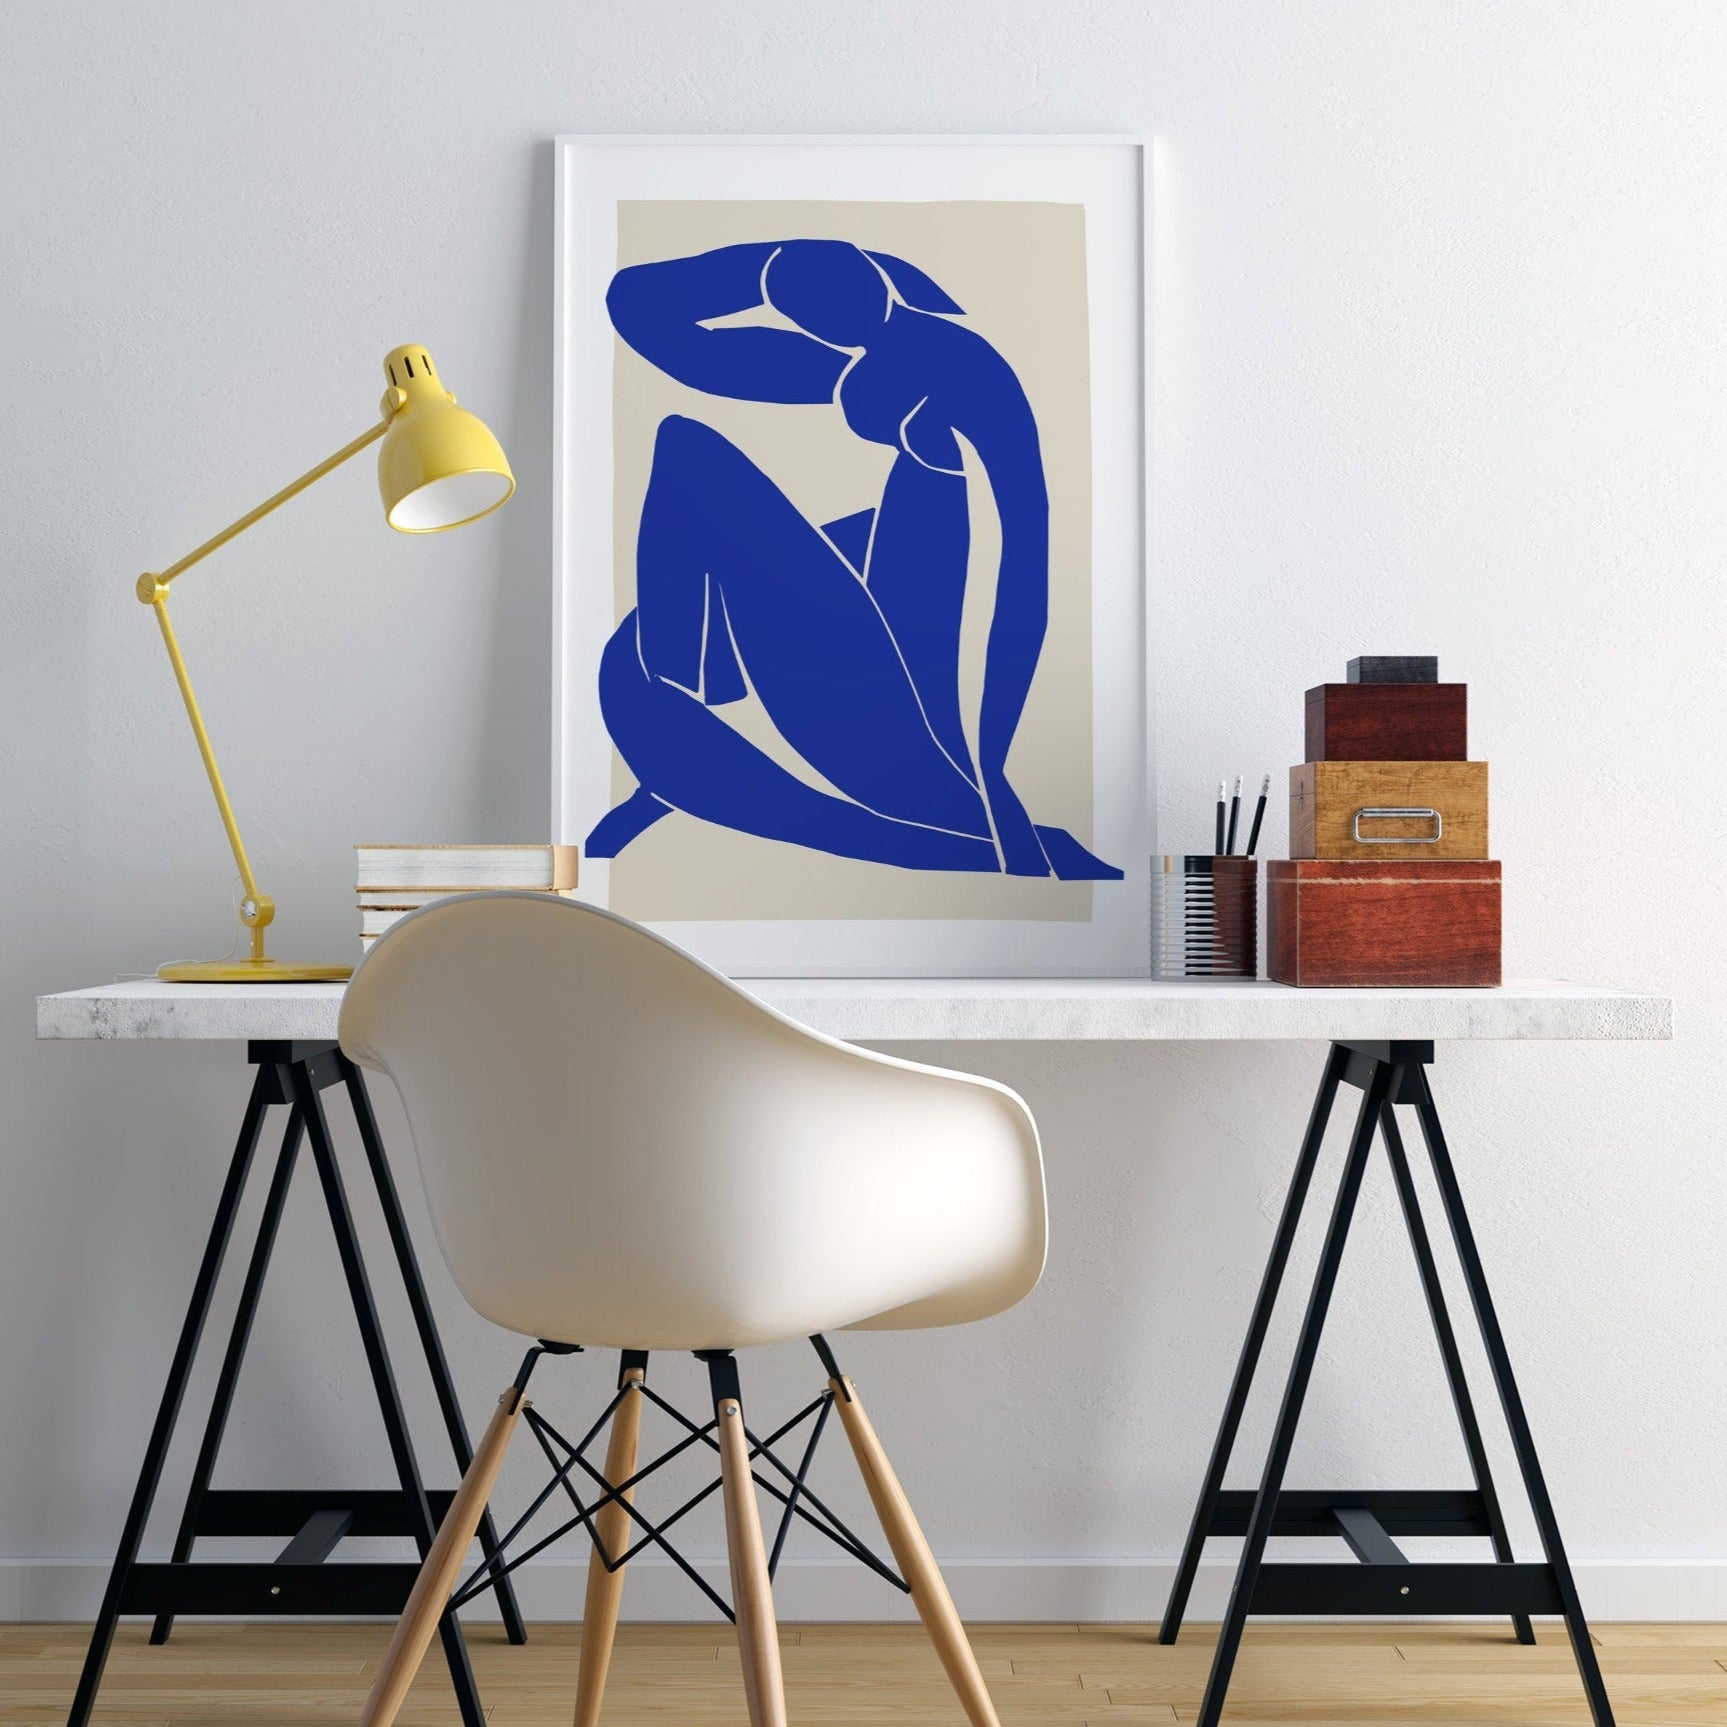 Eclectic interior with filled line art of a blue woman